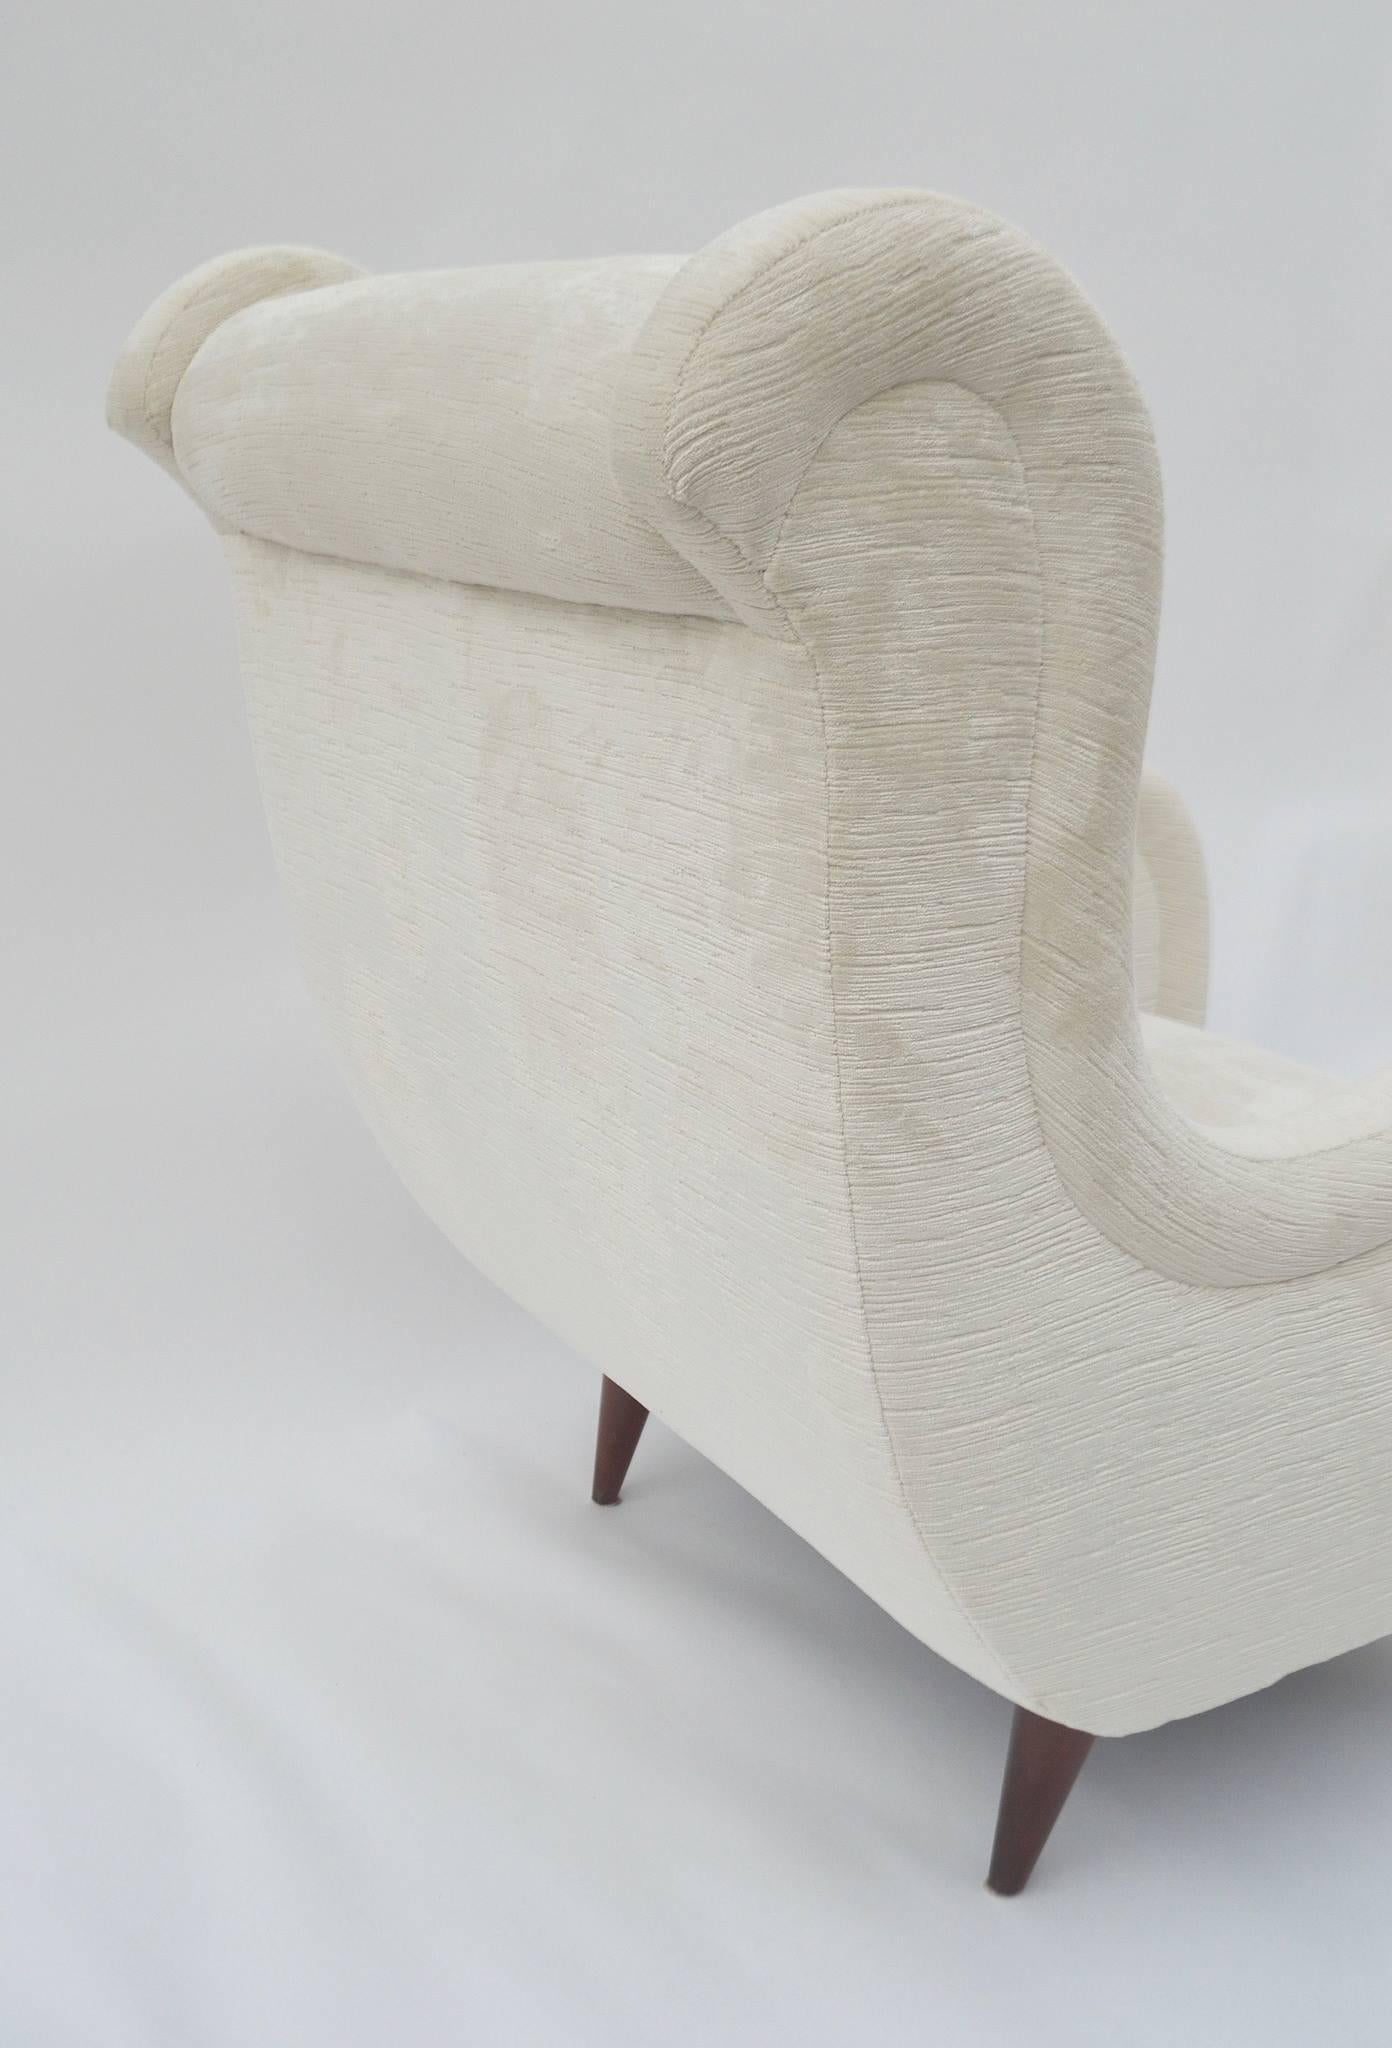 A pair of Italian lounge chairs attributed to Paola Buffa, circa 1965. These chairs have been professionally rebuilt and reupholstered in a striated creamy white/ecru chenille velvet.